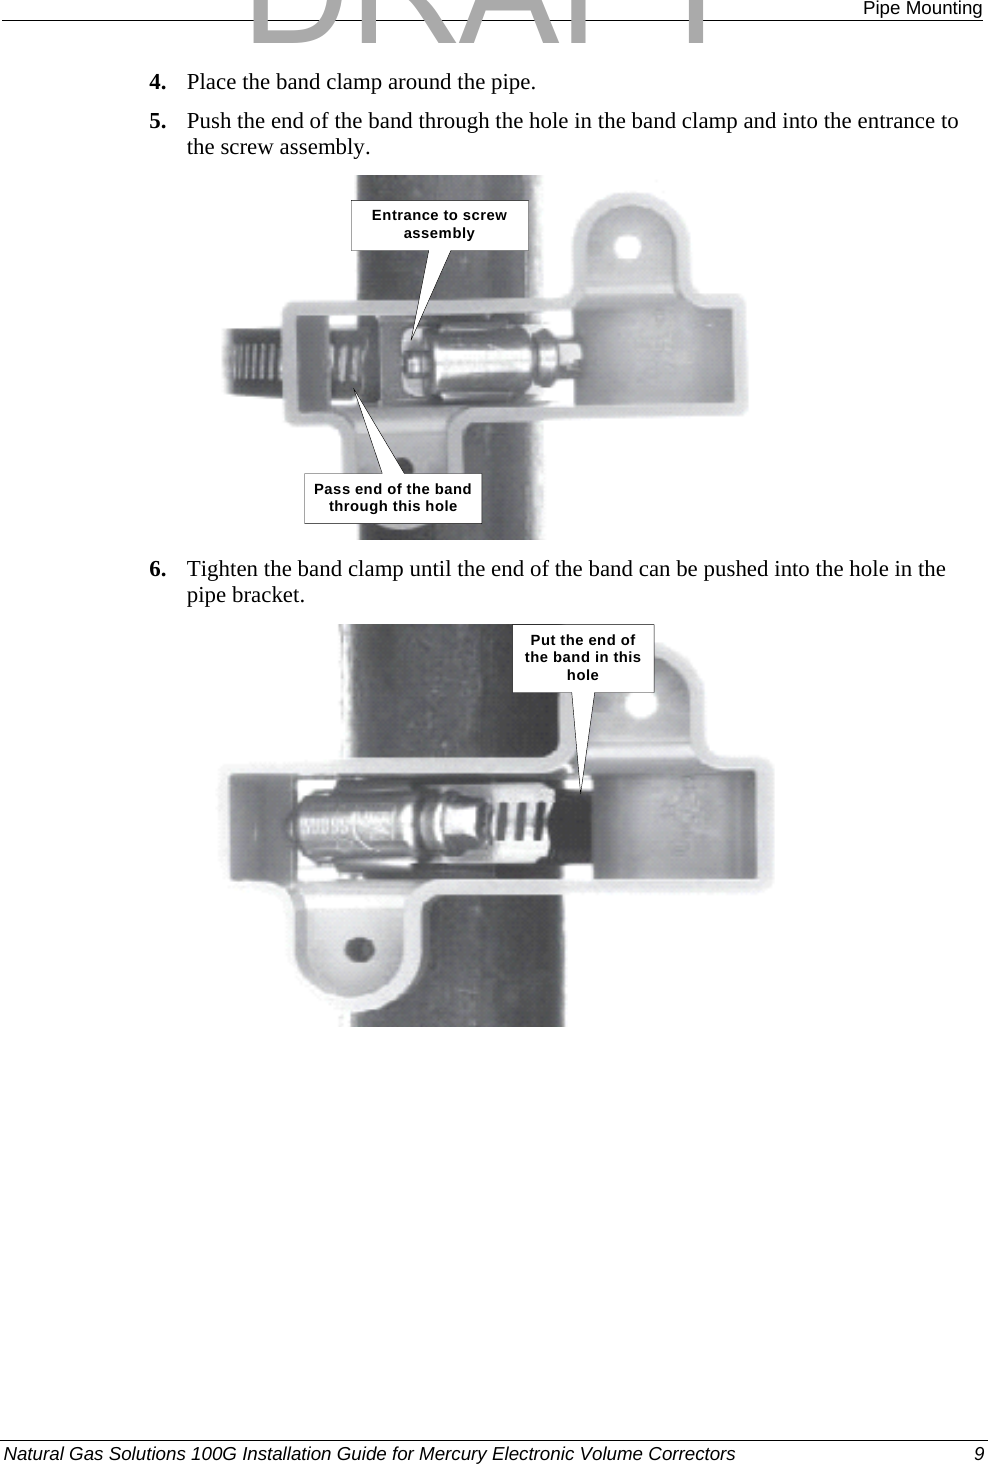  Pipe Mounting 4. Place the band clamp around the pipe. 5. Push the end of the band through the hole in the band clamp and into the entrance to the screw assembly. Pass end of the band through this holeEntrance to screw assembly 6. Tighten the band clamp until the end of the band can be pushed into the hole in the pipe bracket. Put the end of the band in this hole Natural Gas Solutions 100G Installation Guide for Mercury Electronic Volume Correctors  9  DRAFT